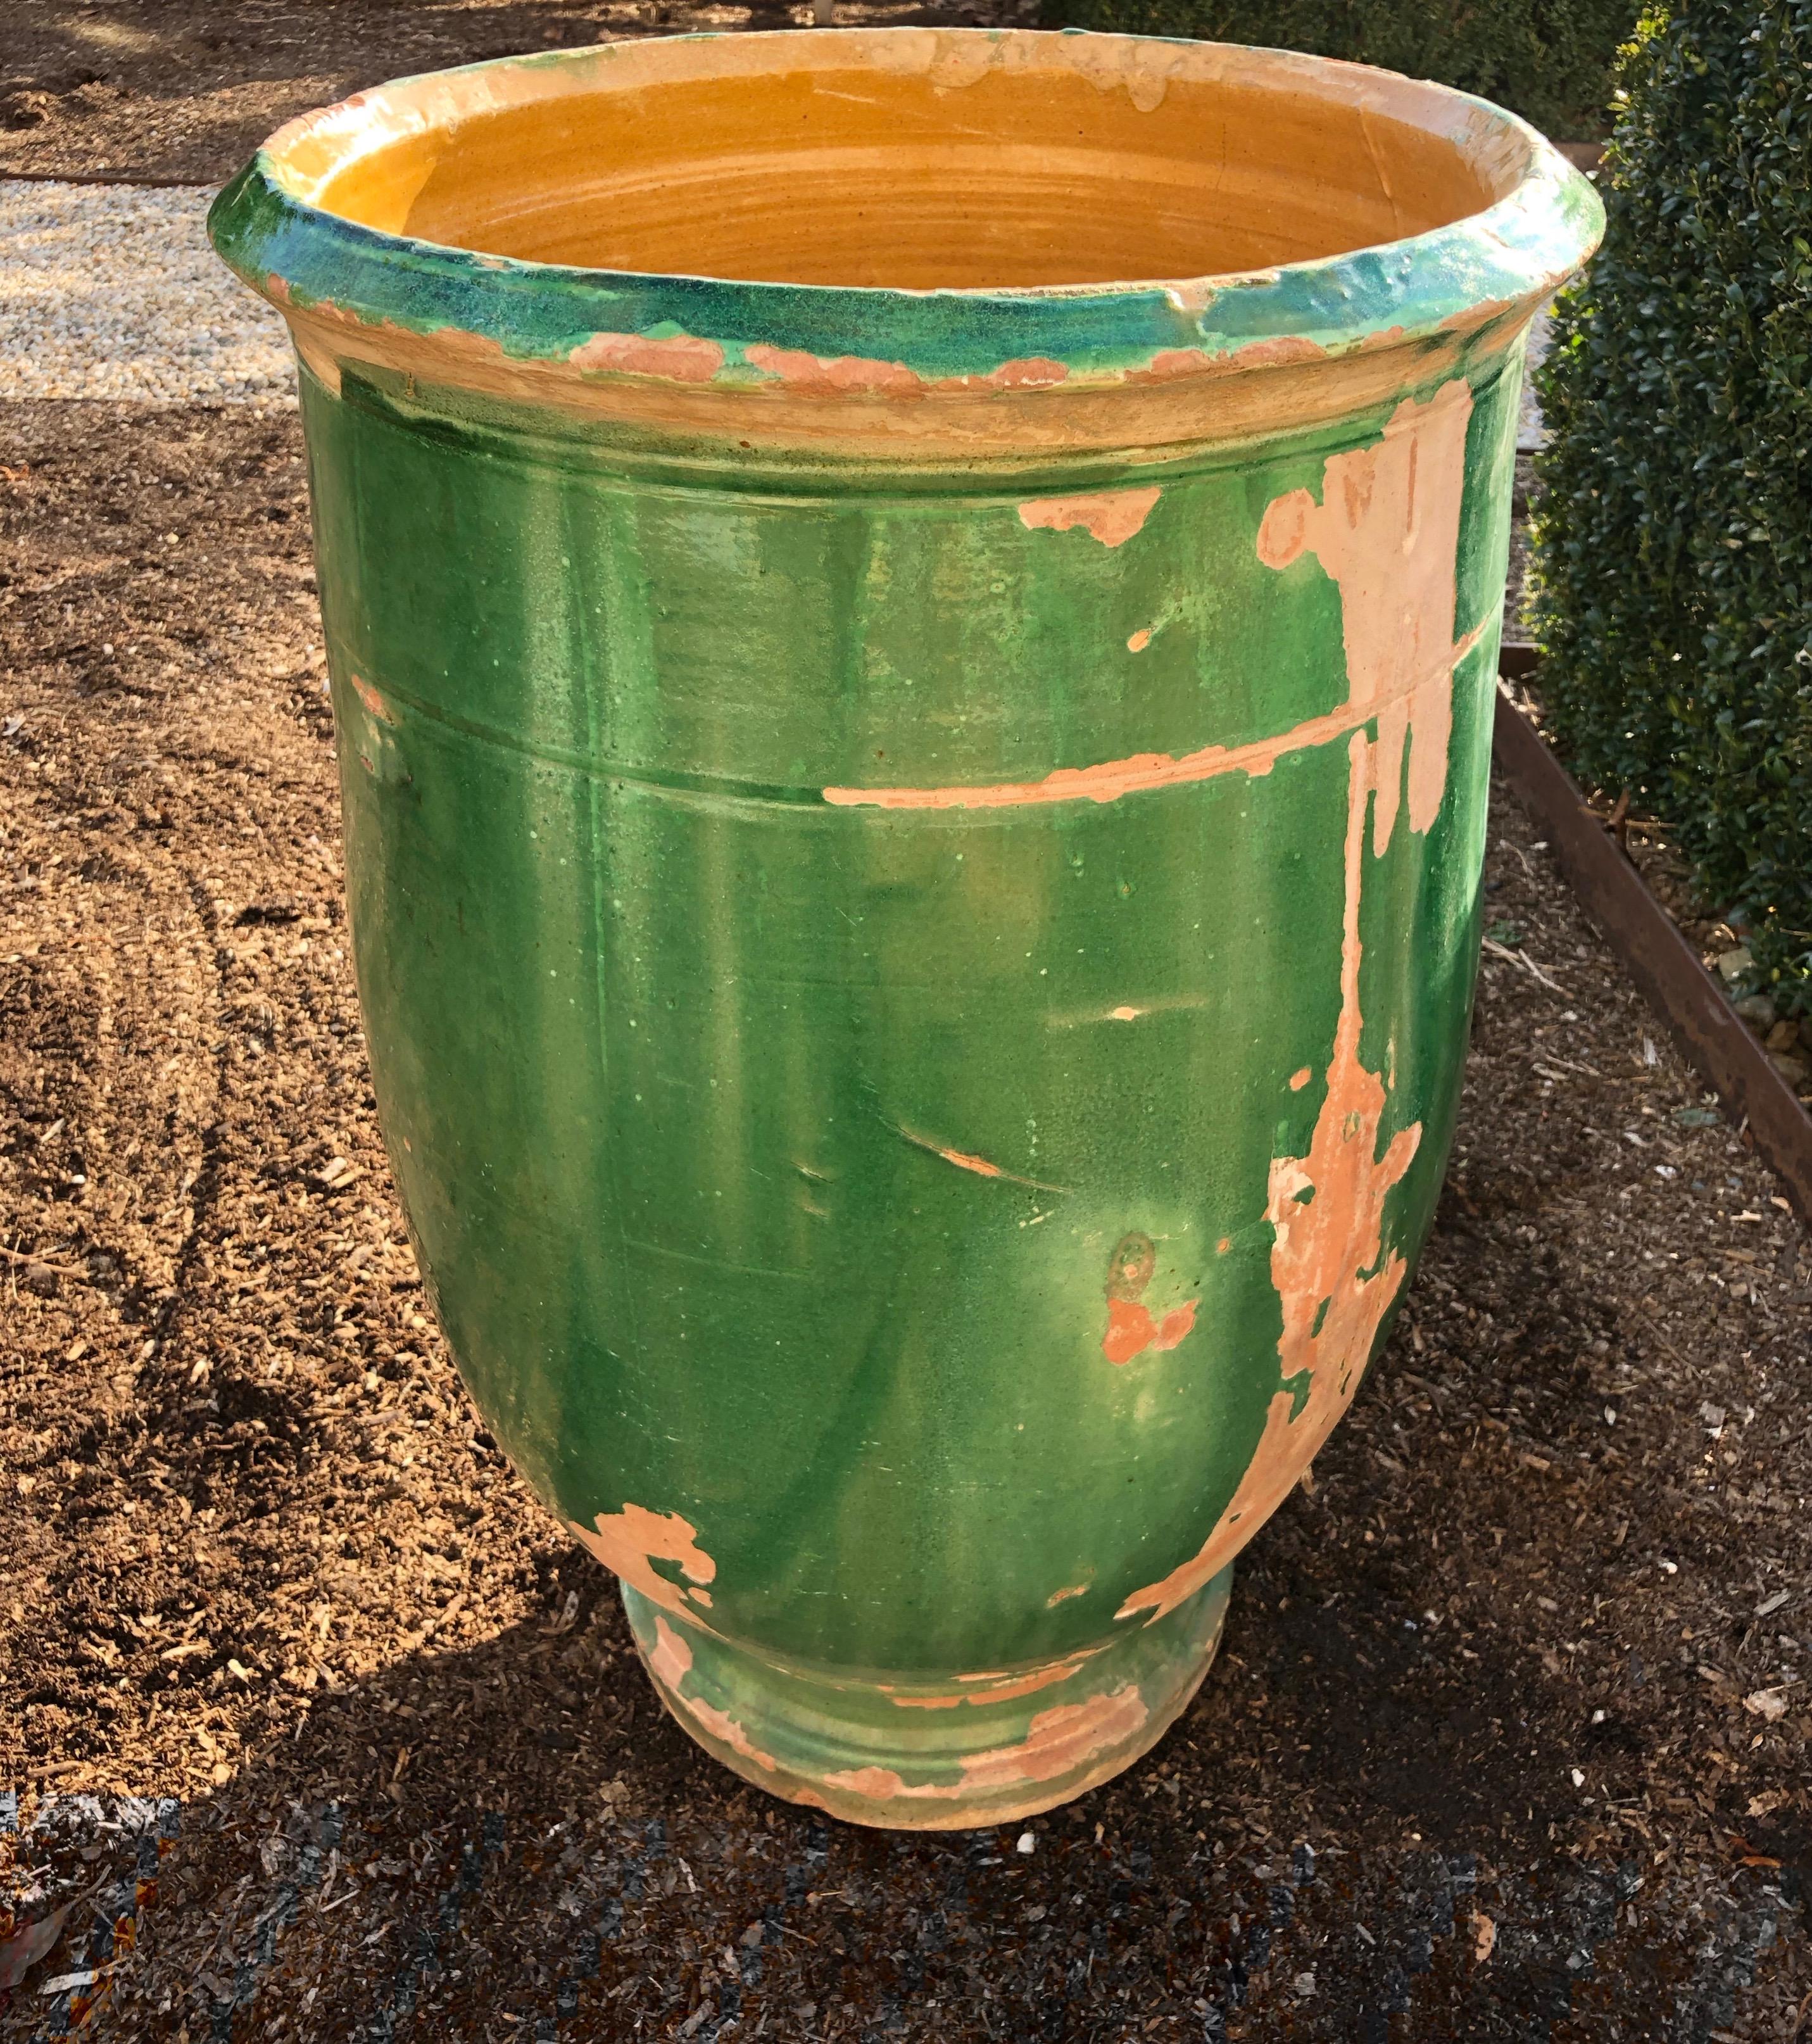 It’s true that we have a thing for green-glazed 19th century pots, and this one from Apt in the South of France is a beauty. One of three that we currently have in stock (see CPO #1045 and CPO #1036), it is glazed in an ochre color on the inside and